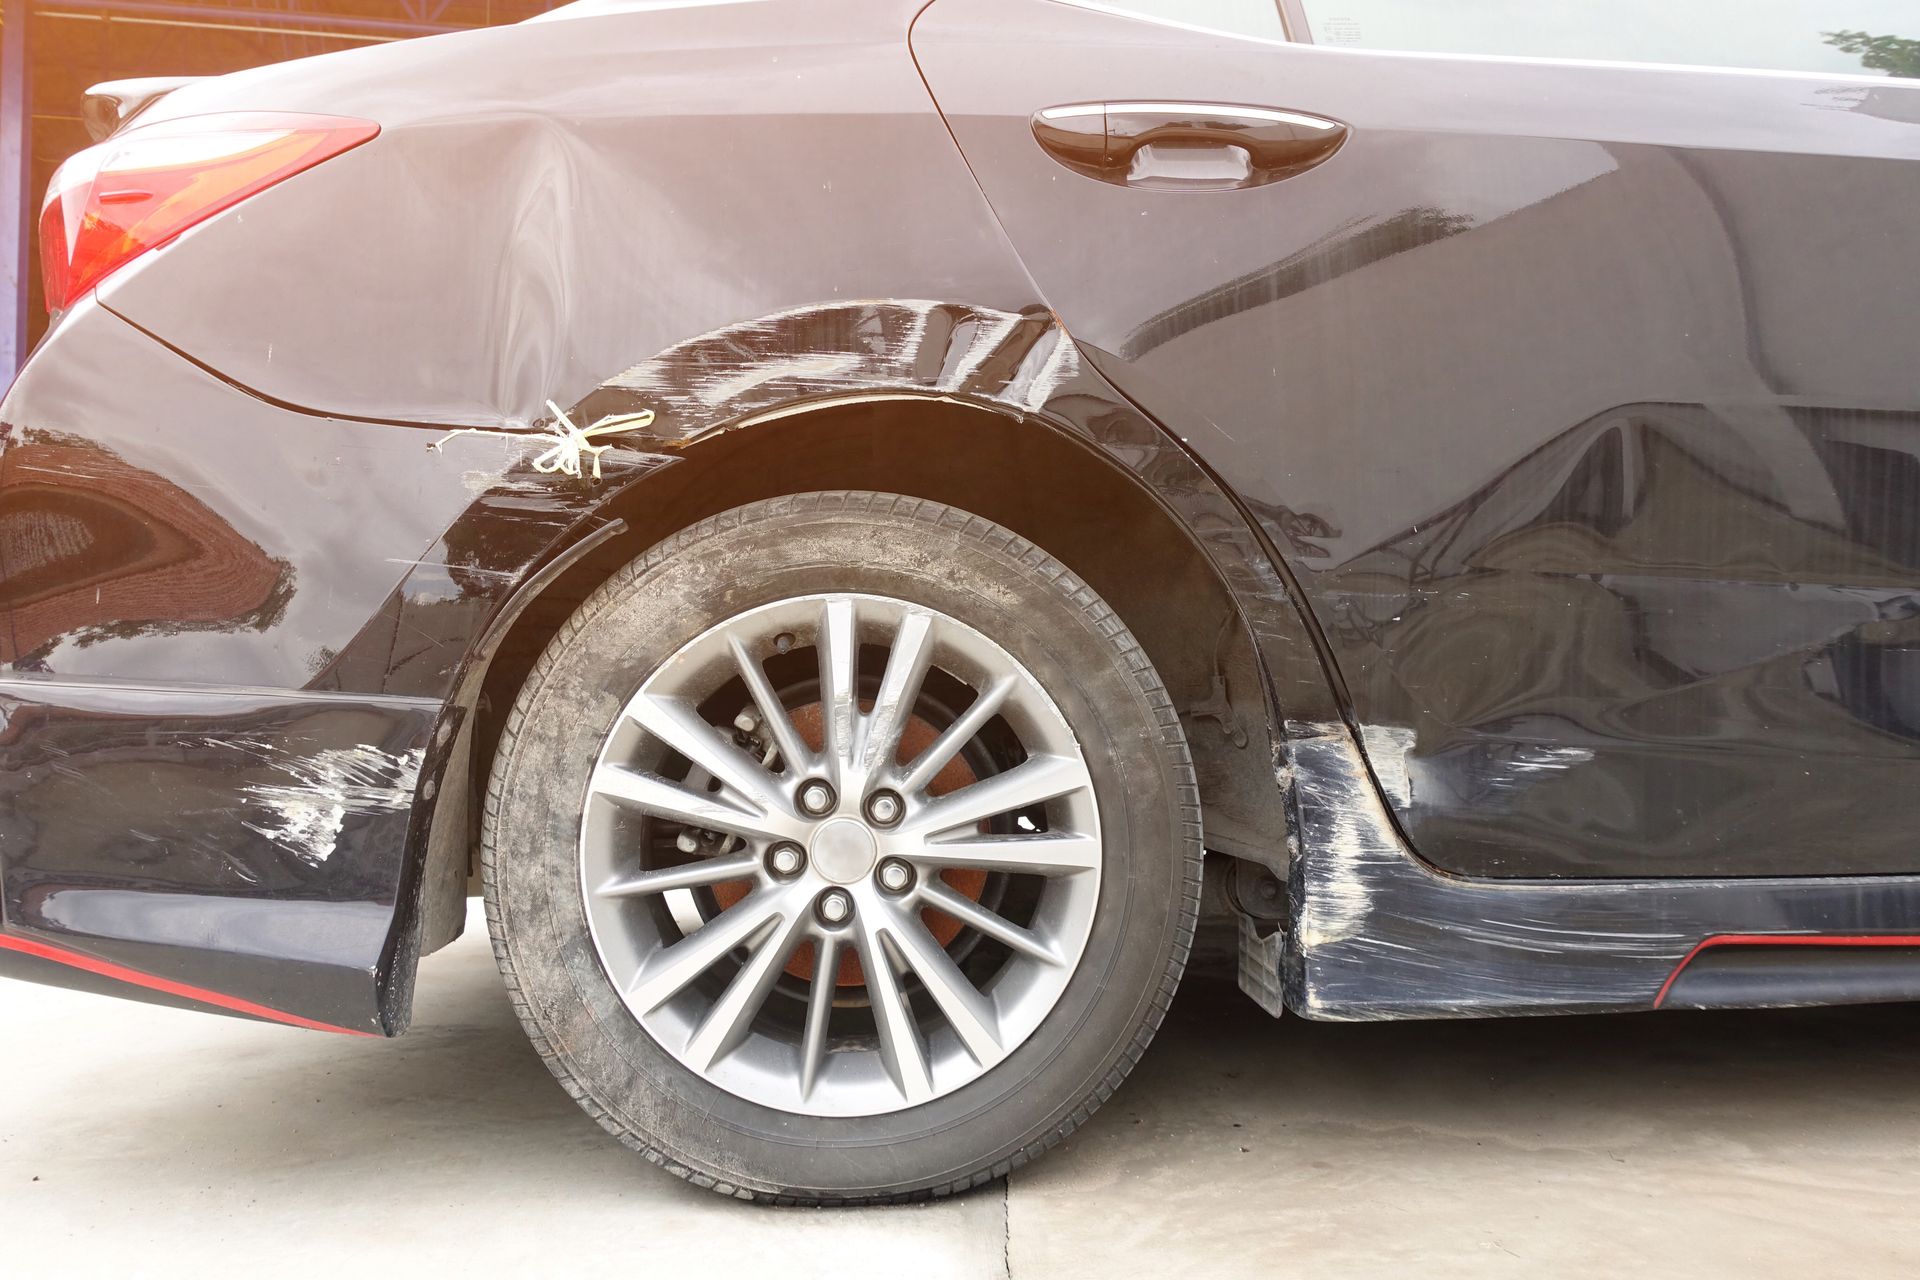 a black car with a damaged fender is parked after a side swipe car accident.  Attorney Ernesto Gonzalez Article on types of accidents and how to avoid them.